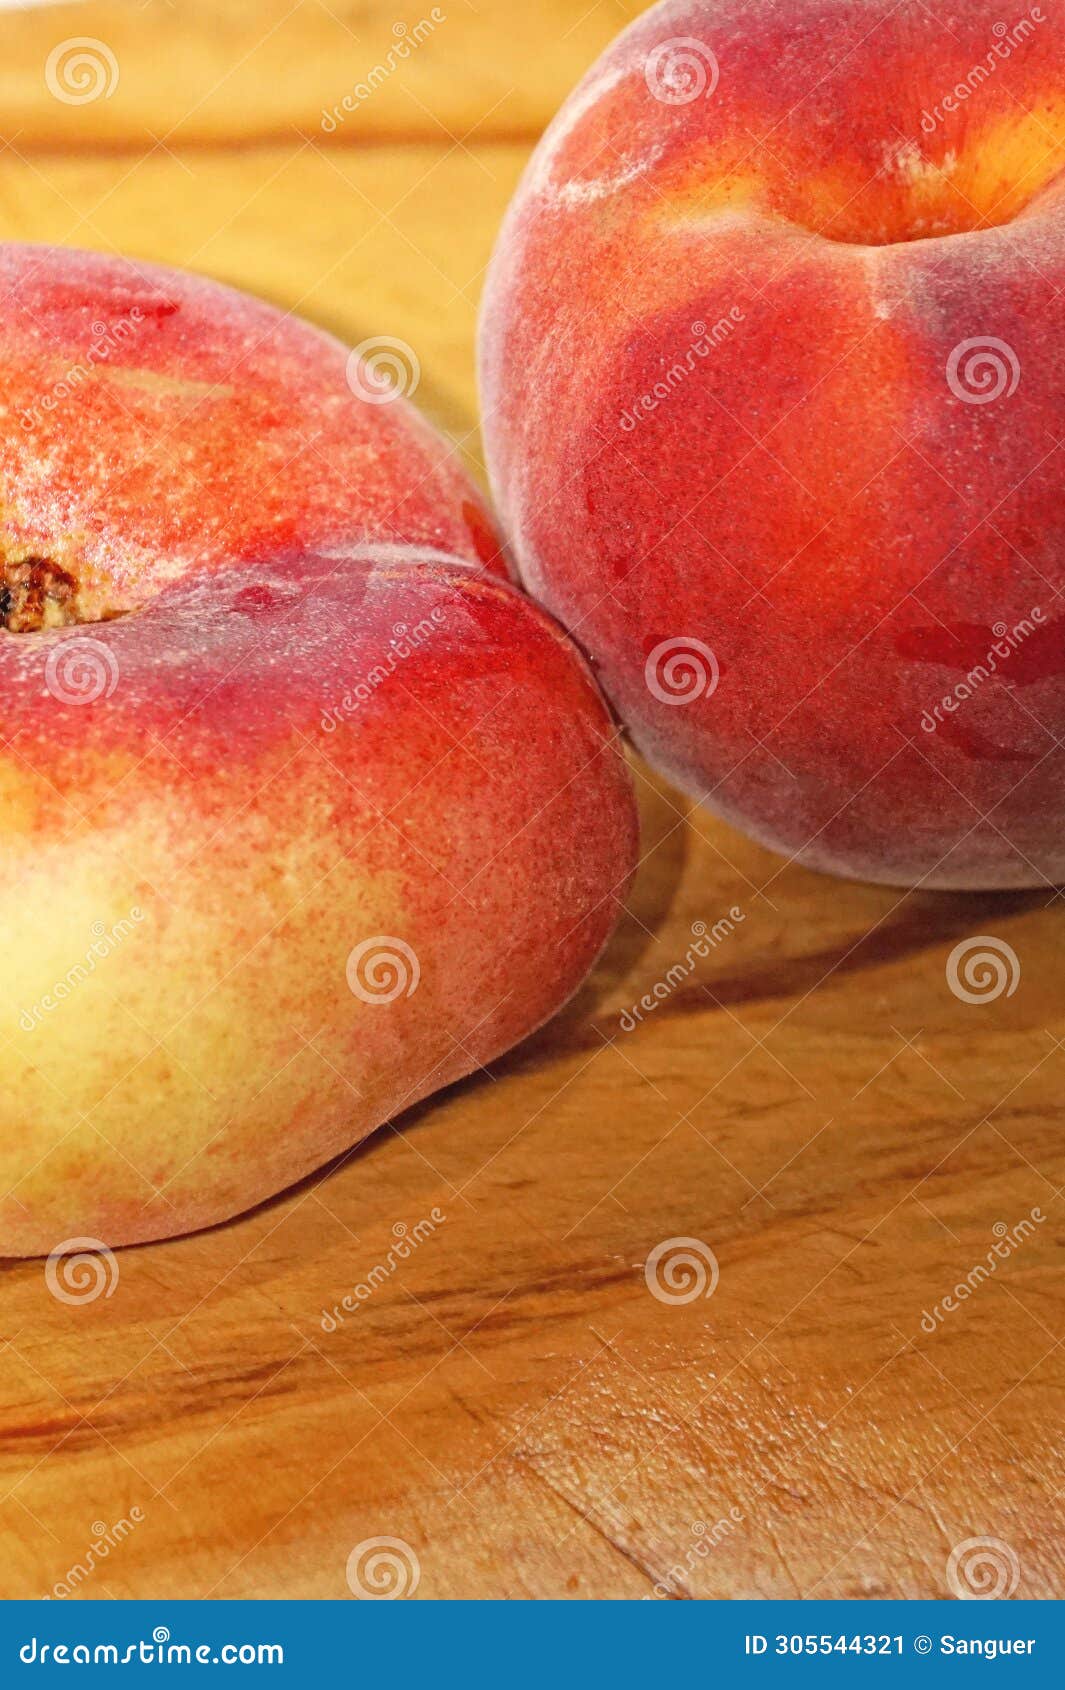 peach and paraguayan on a cutting board in the kitchen